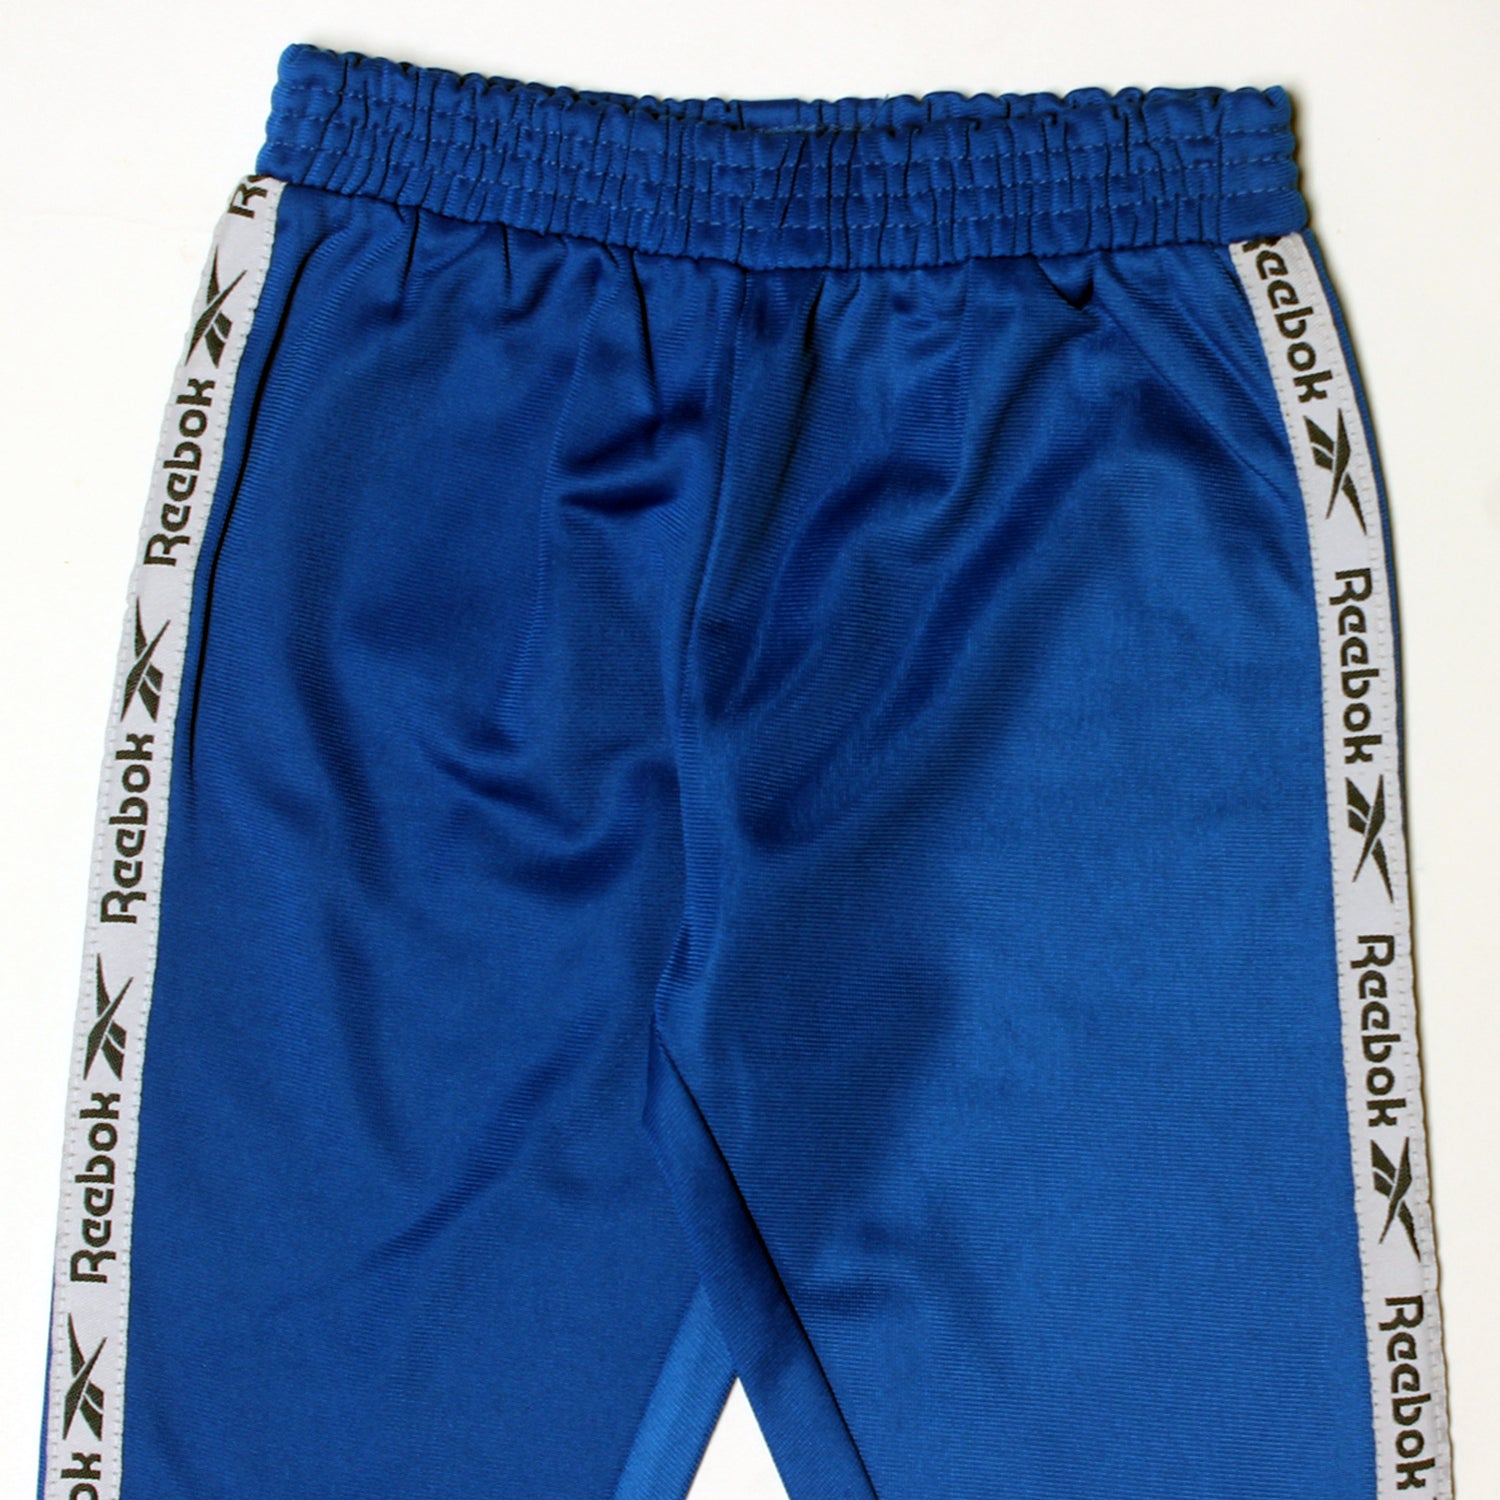 NEW ROYAL BLUE WITH WHITE STRIPES JOGGER PANTS TROUSER